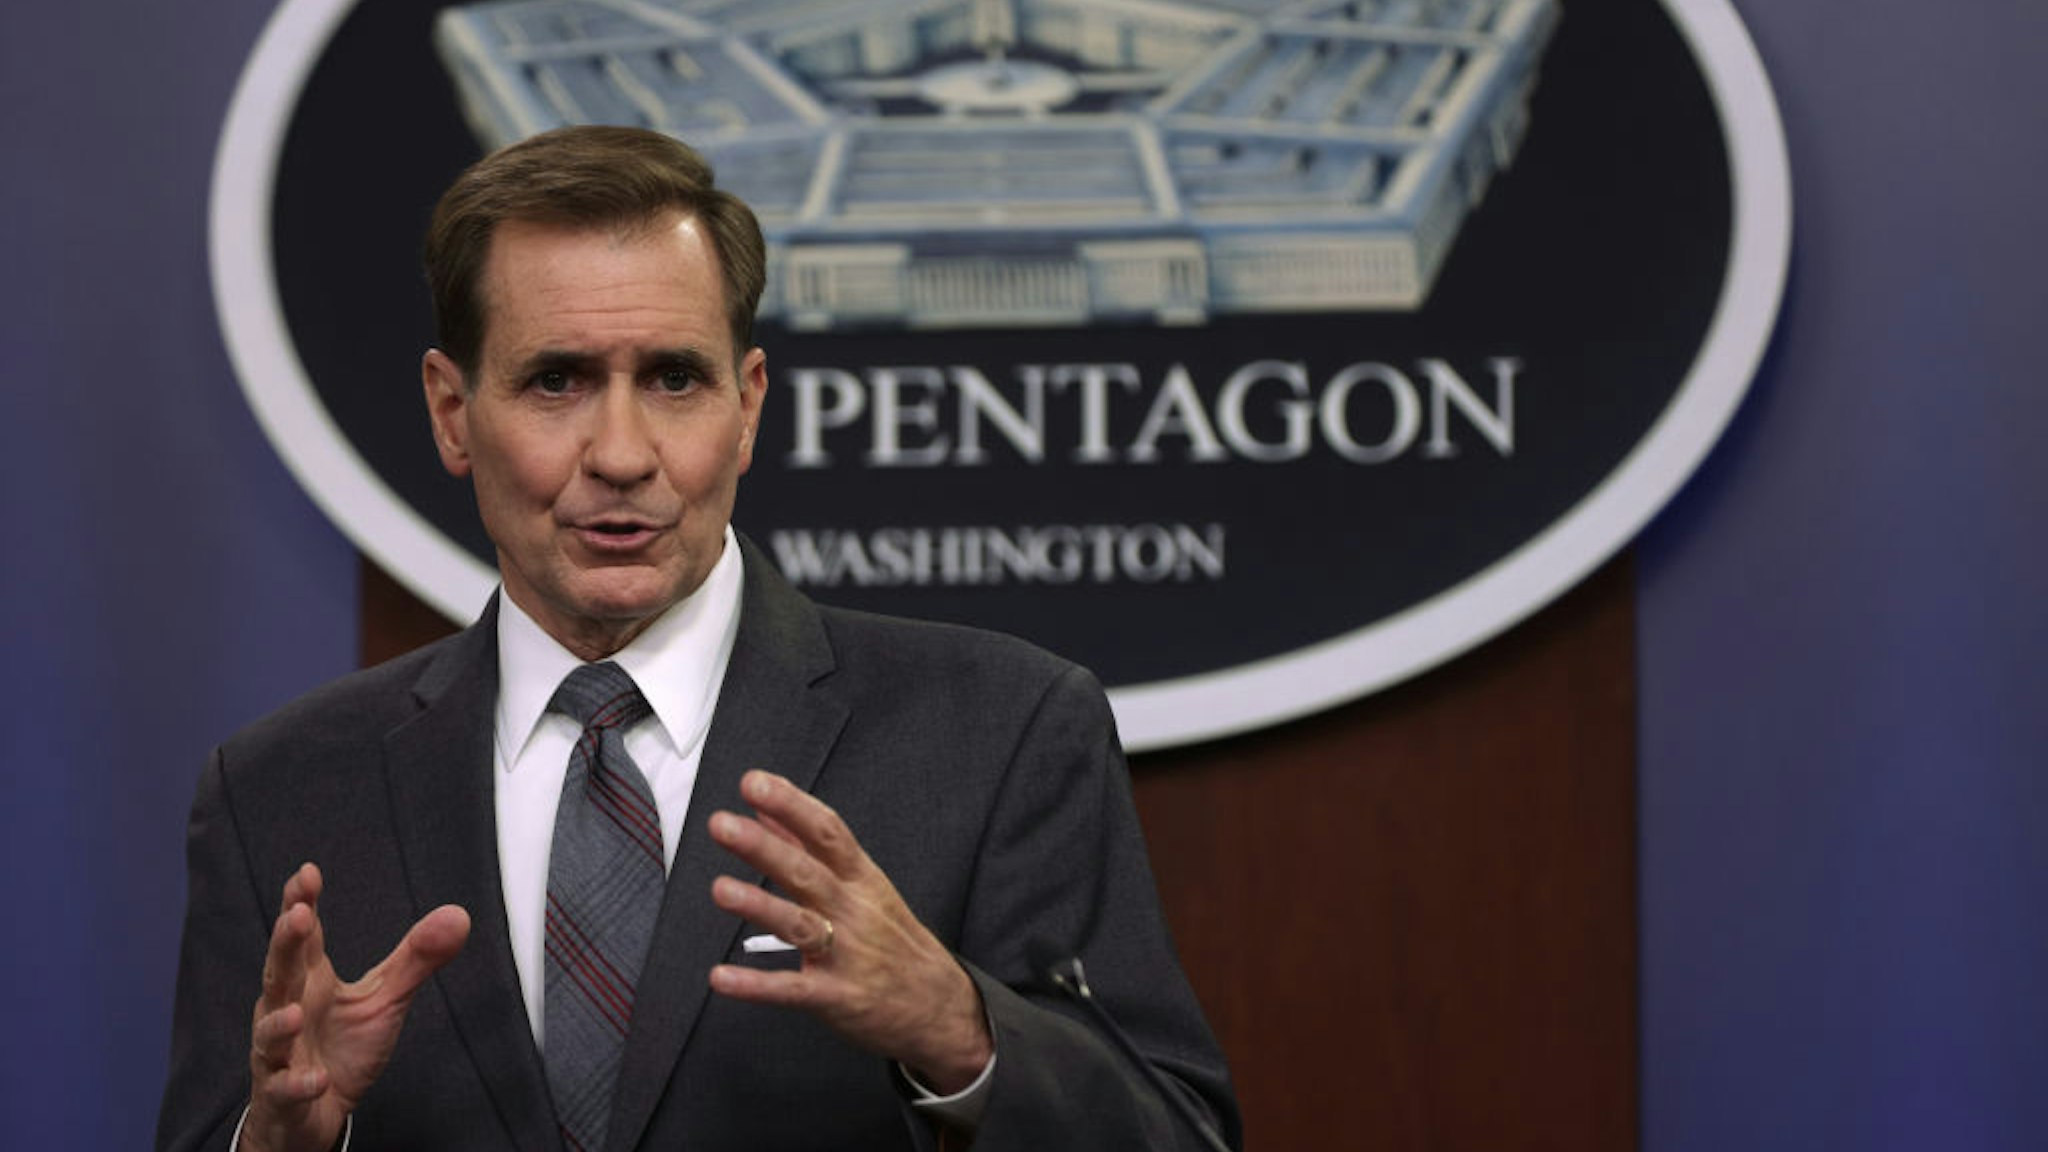 ARLINGTON, VIRGINIA - AUGUST 13: U.S. Department of Defense Press Secretary John Kirby participates in a news briefing at the Pentagon August 13, 2021 in Arlington, Virginia. Kirby discussed the deployment of 3,000 troops to Afghanistan to help to evacuate U.S. embassy personnel as the Taliban seized control of Kandahar and Herat, the second and third largest cities in Afghanistan, just weeks prior to President Joe Biden's plan to completely withdraw U.S. troops there. (Photo by Alex Wong/Getty Images)